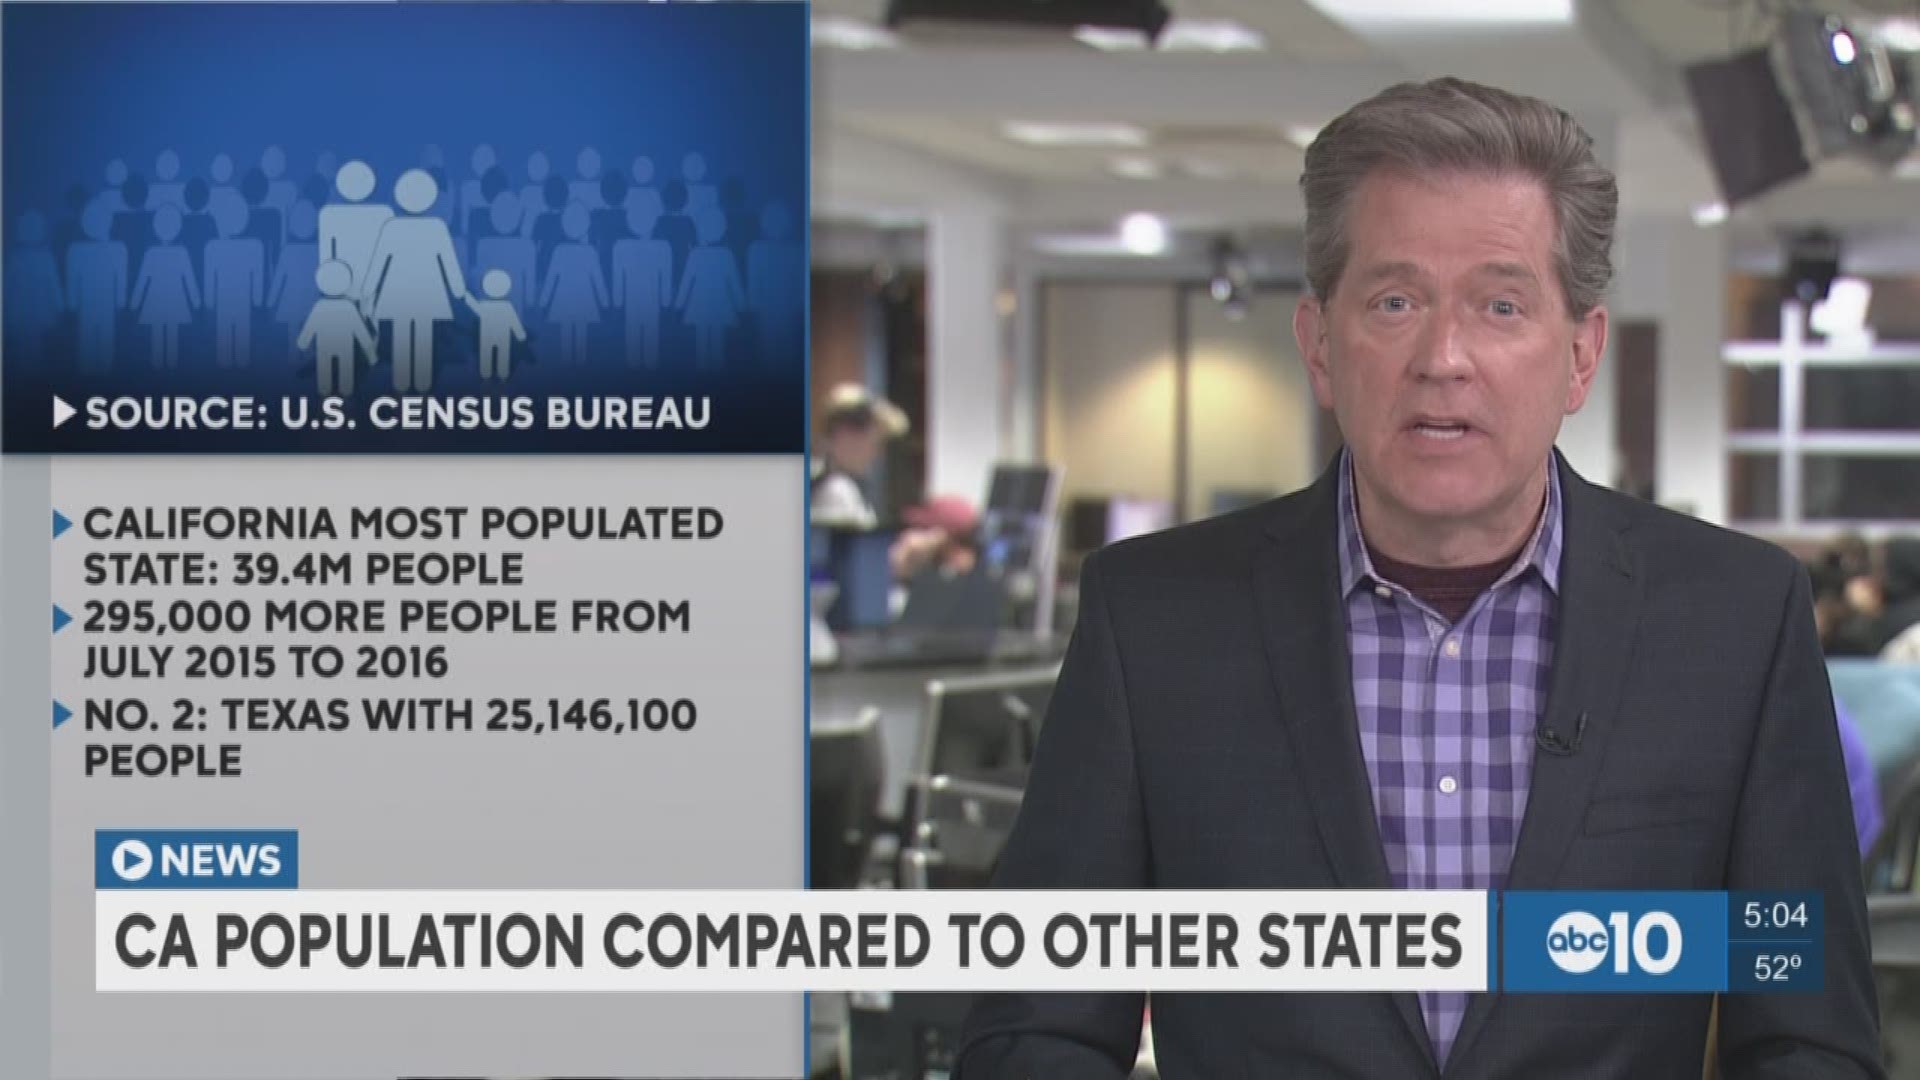 Ne census date released shows more than 39 million people live in California. (Dec. 21, 2016)